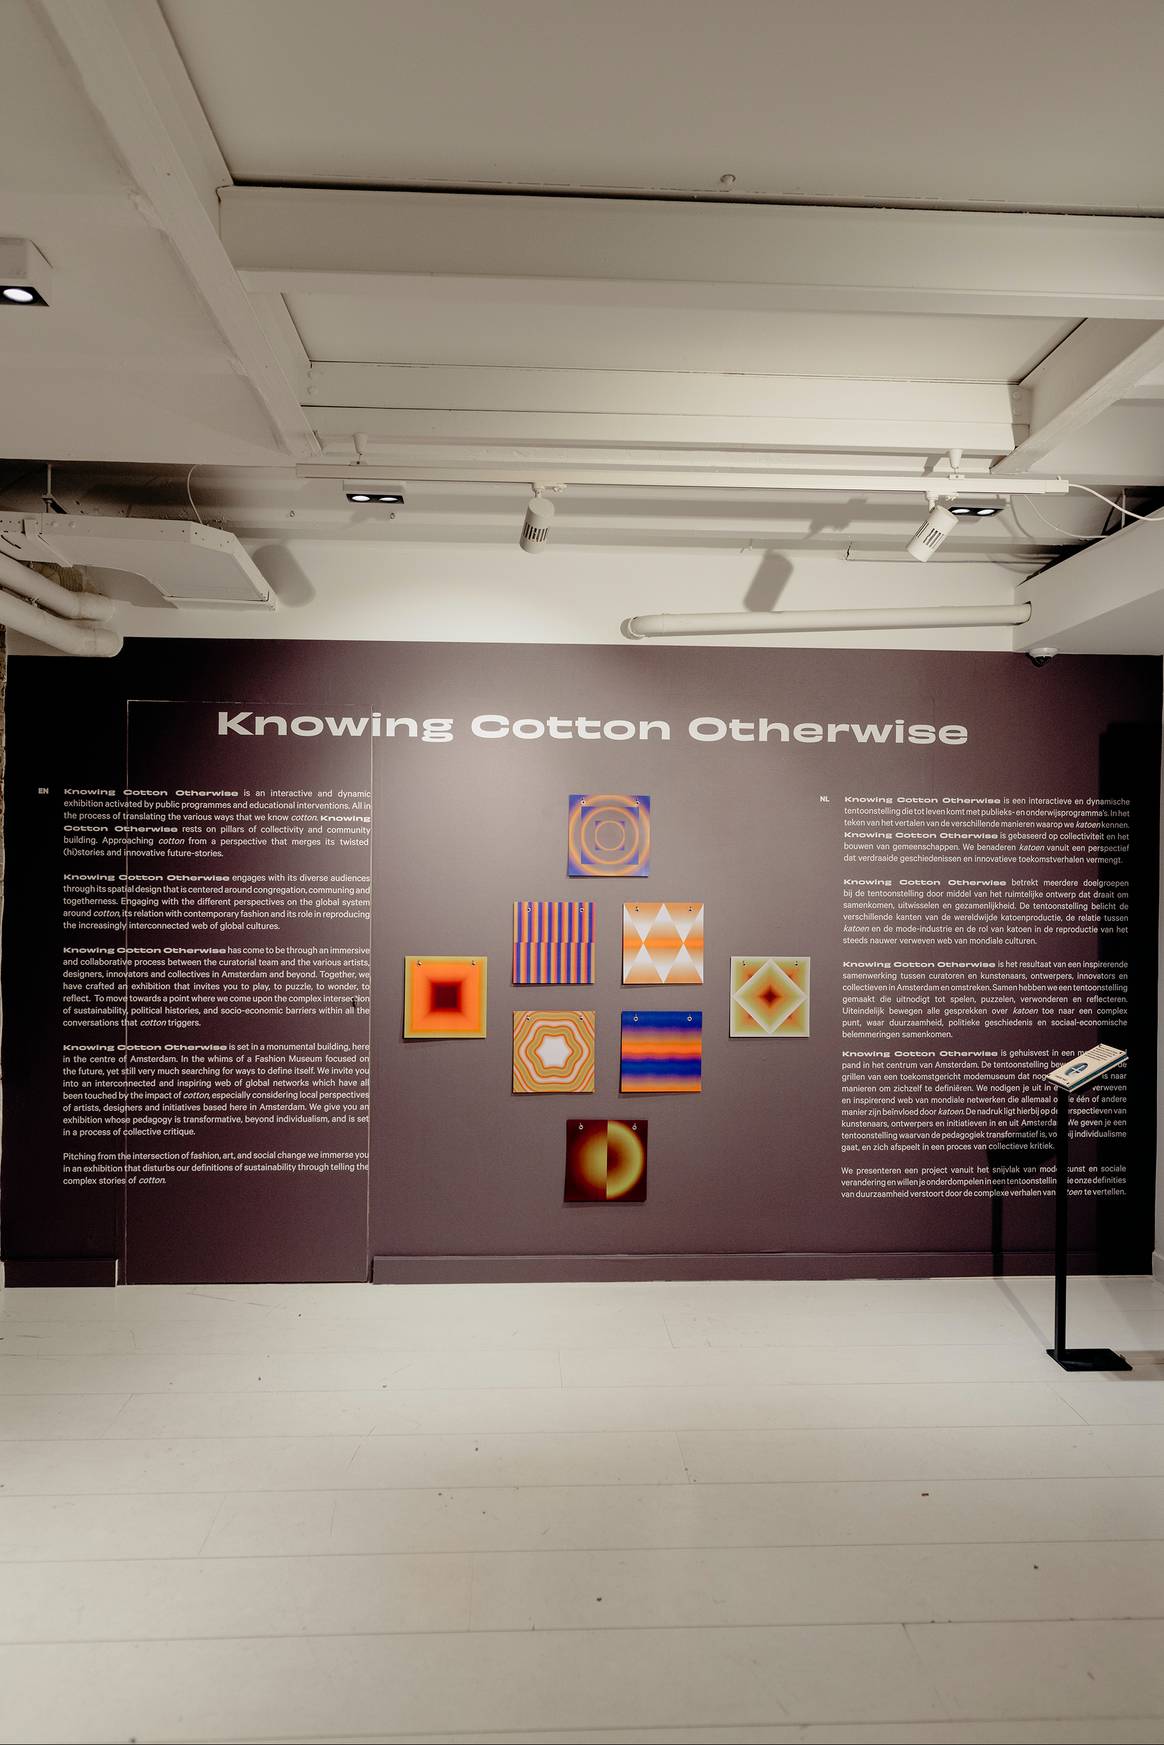 Image: Knowing Cotton Otherwise in Fashion for Good Museum | Credit: Lorenzo de Wit